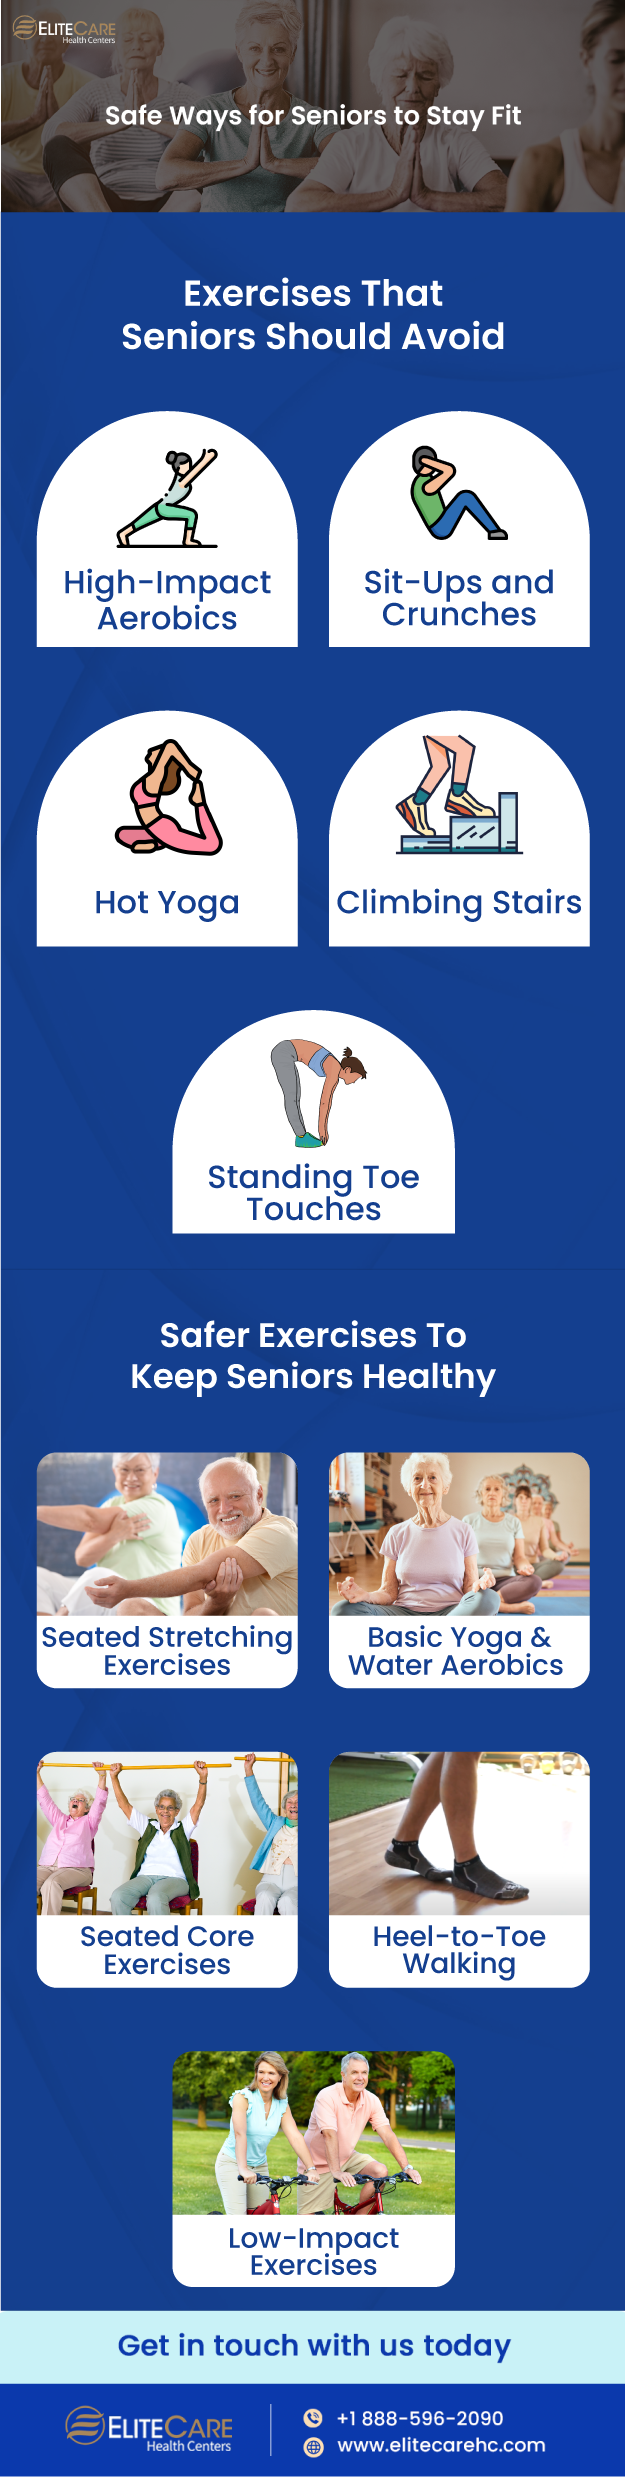 Safe Ways for Seniors to Stay Fit | Infographic